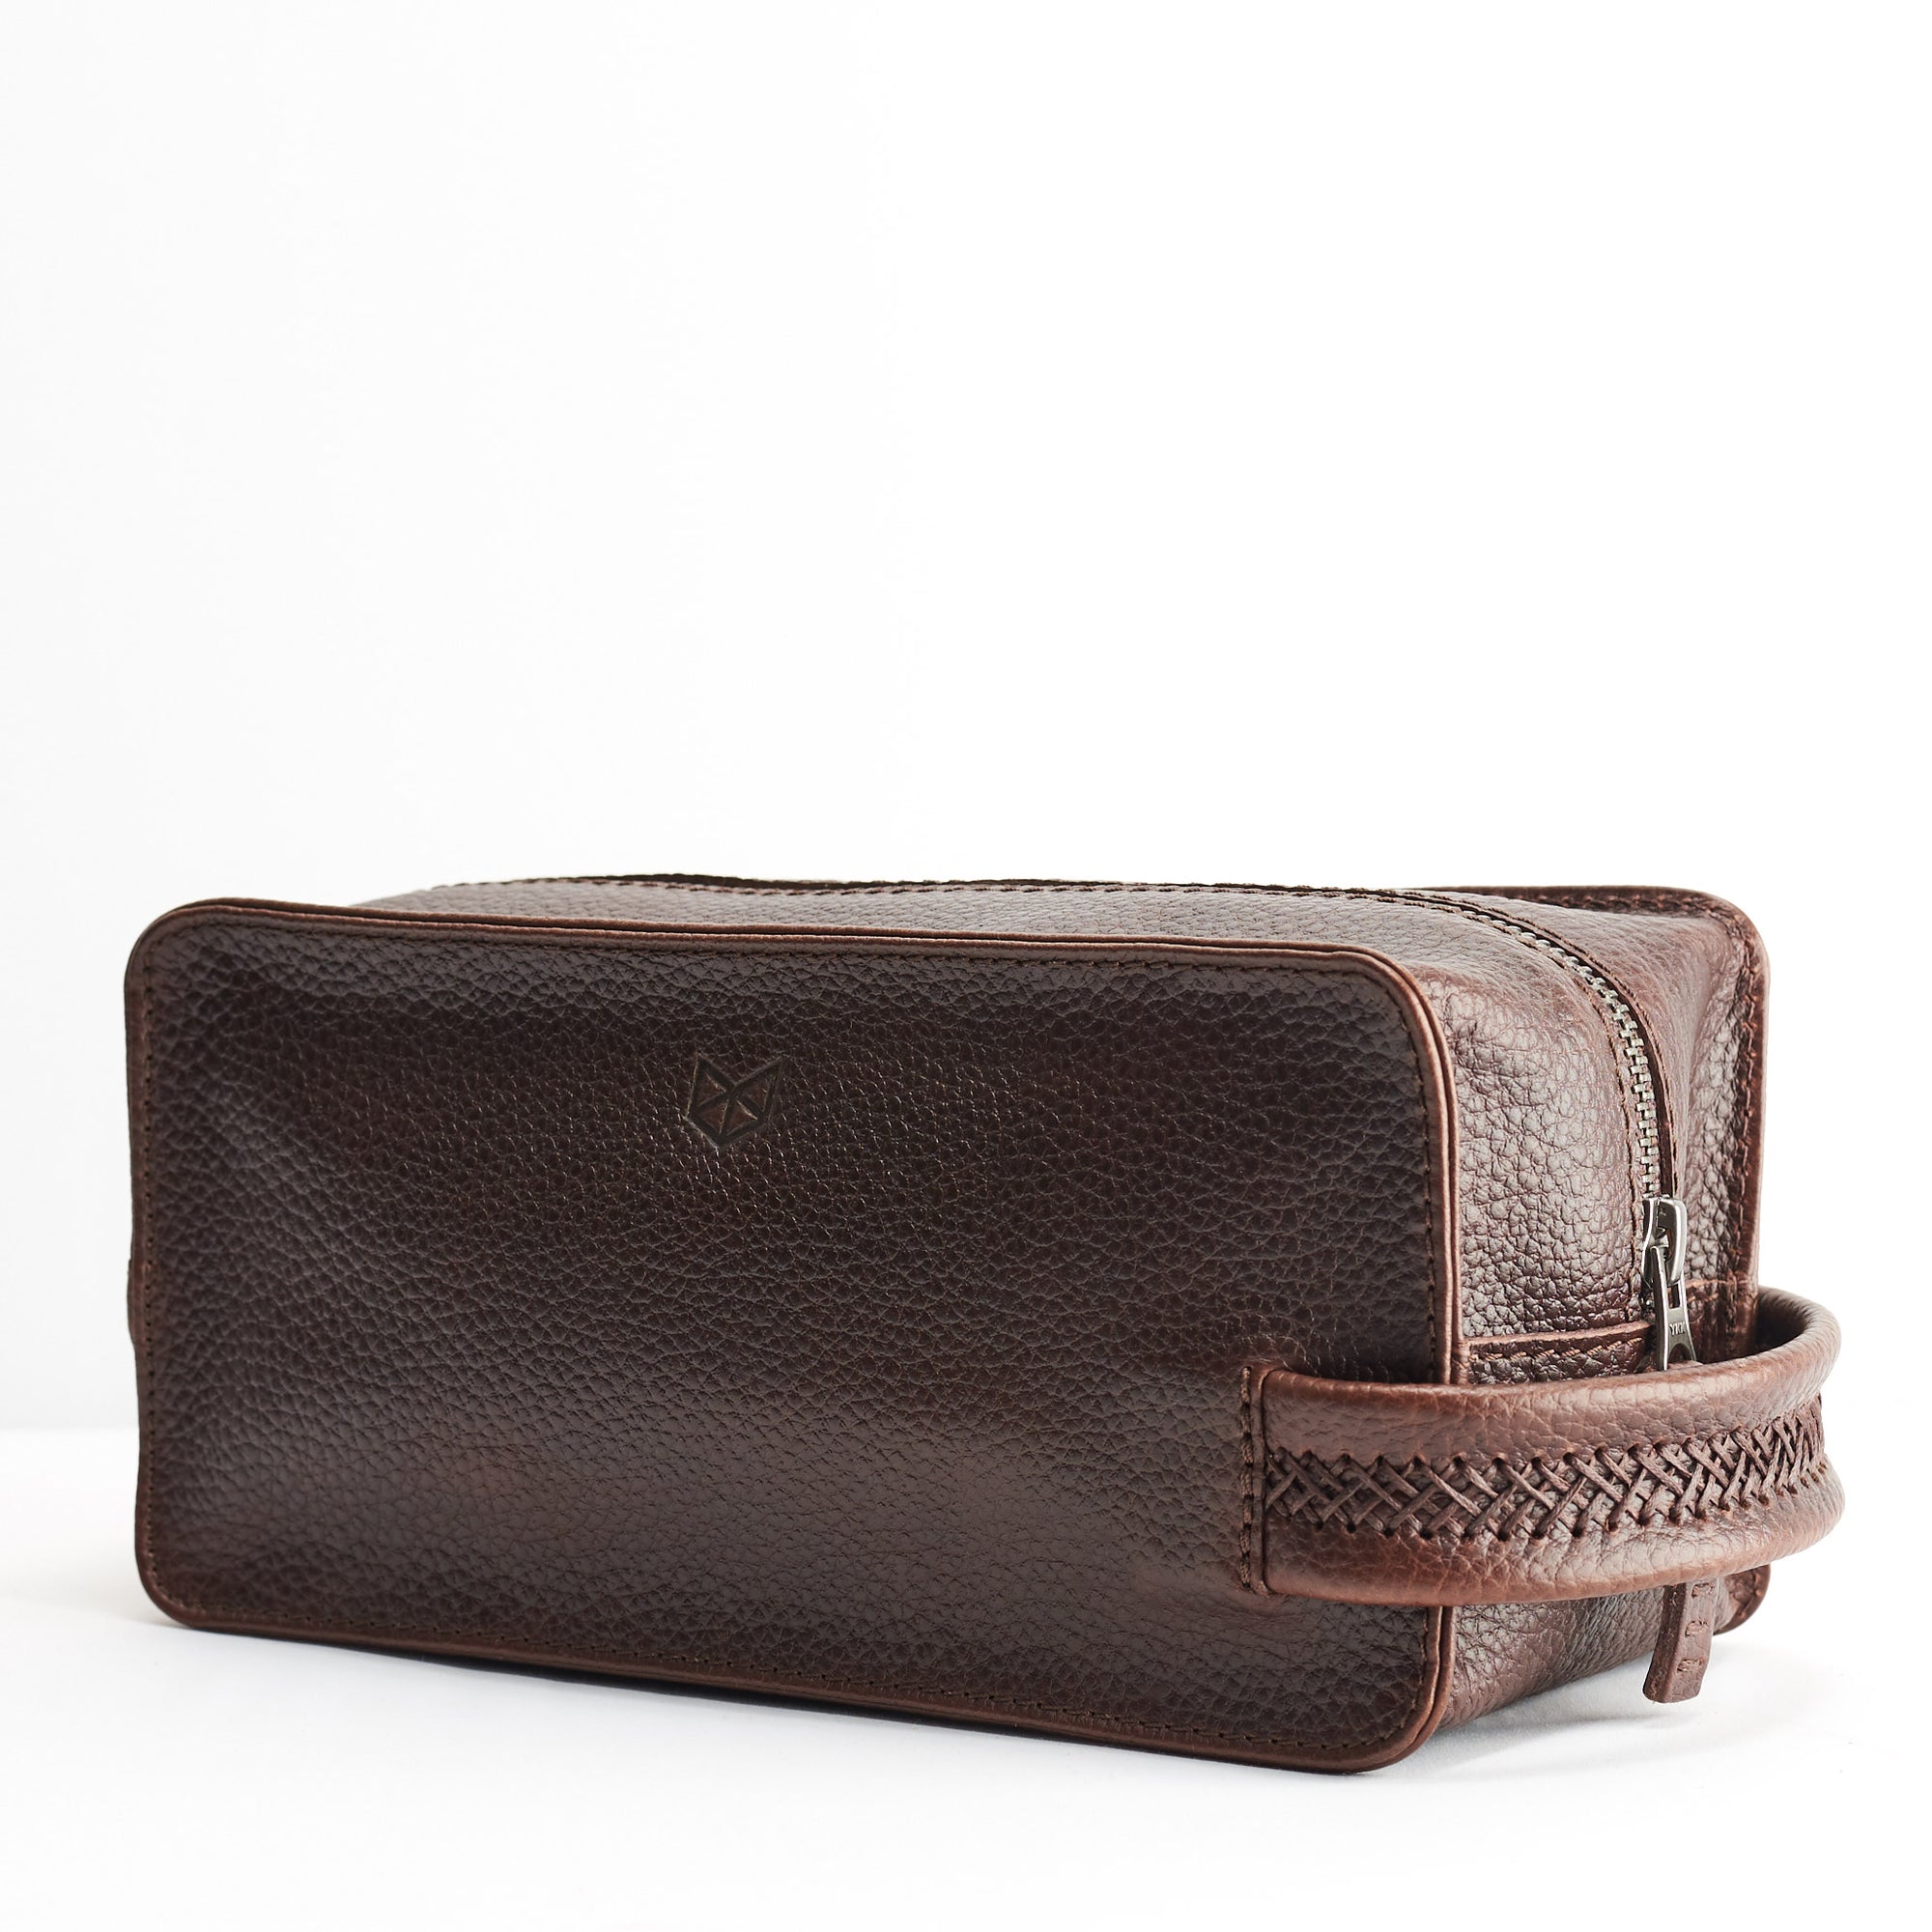 Angle. Dark Brown leather toiletry, shaving bag with hand stitched handle. Groomsmen gifts